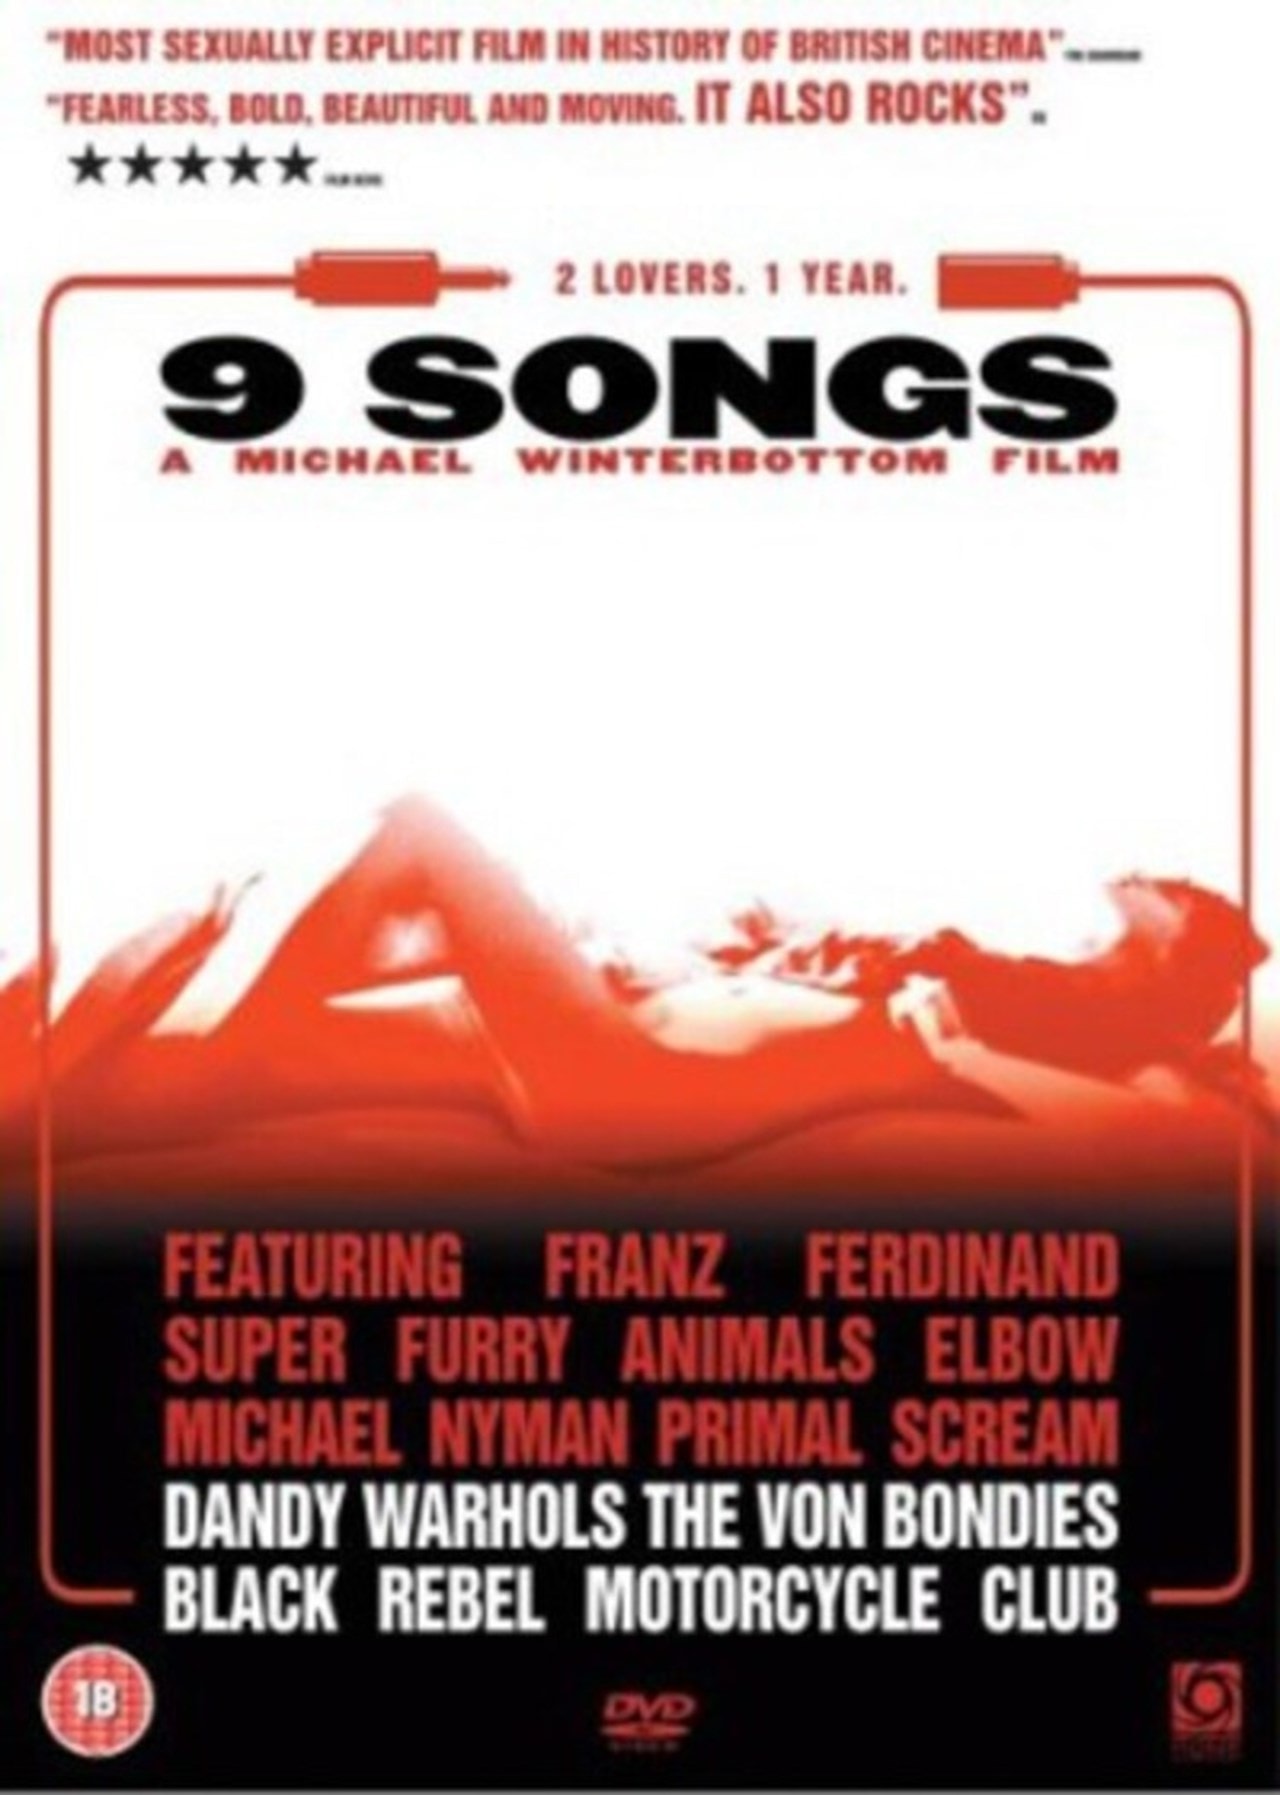 9 Songs | DVD | Free shipping over £20 | HMV Store